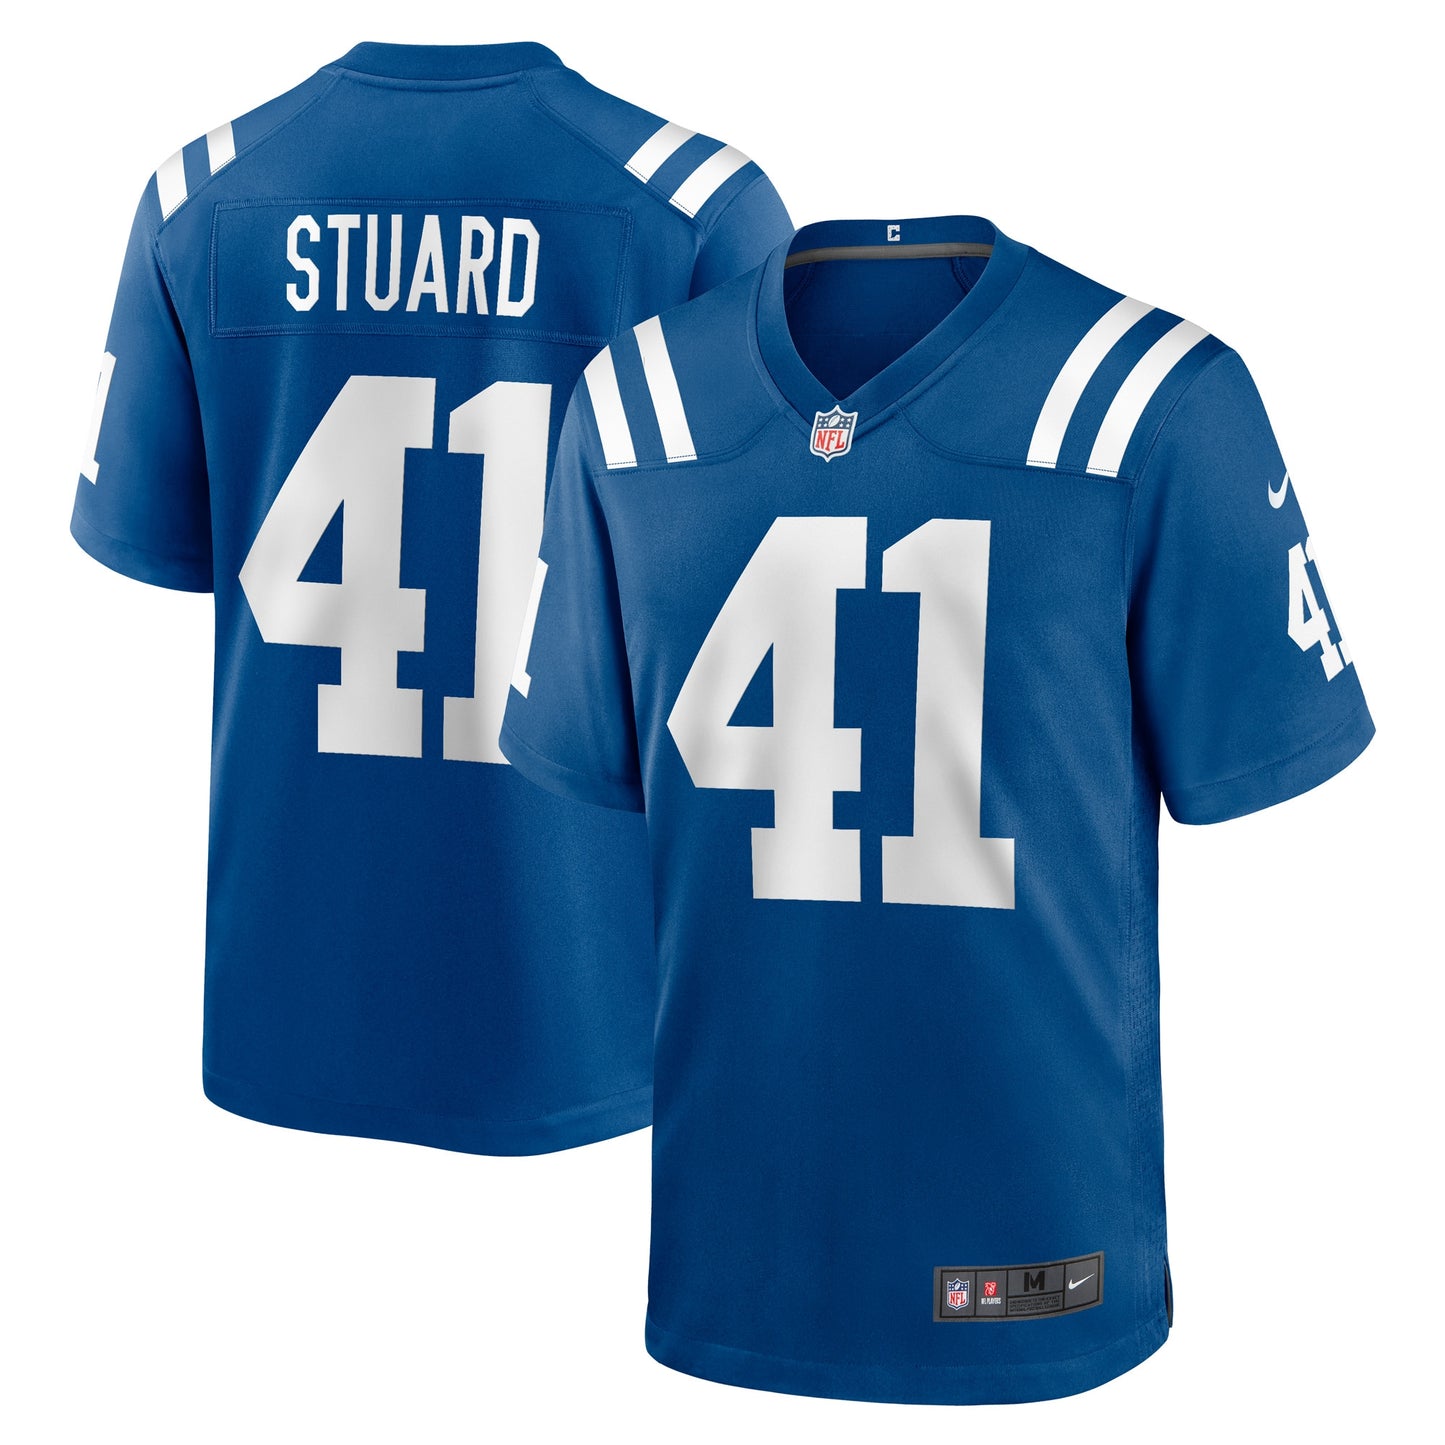 Grant Stuard Indianapolis Colts Nike Game Player Jersey - Royal